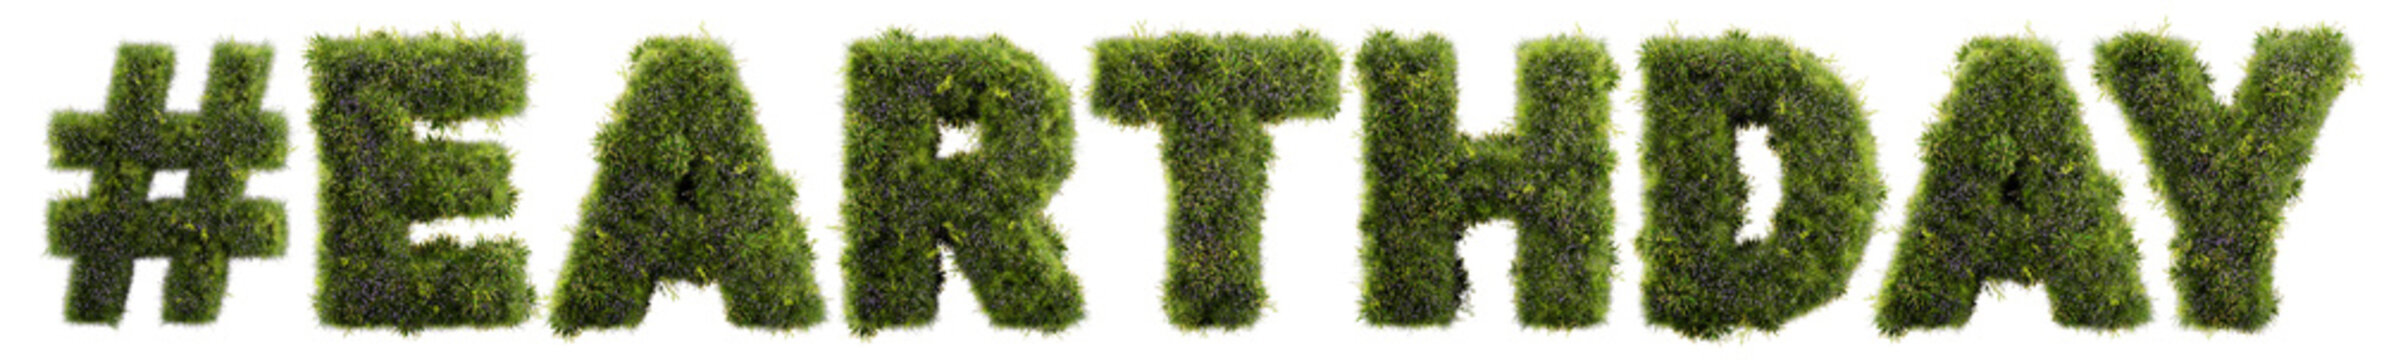 3D render letters made of grass and flowers, easrth day hashtag isolated on white